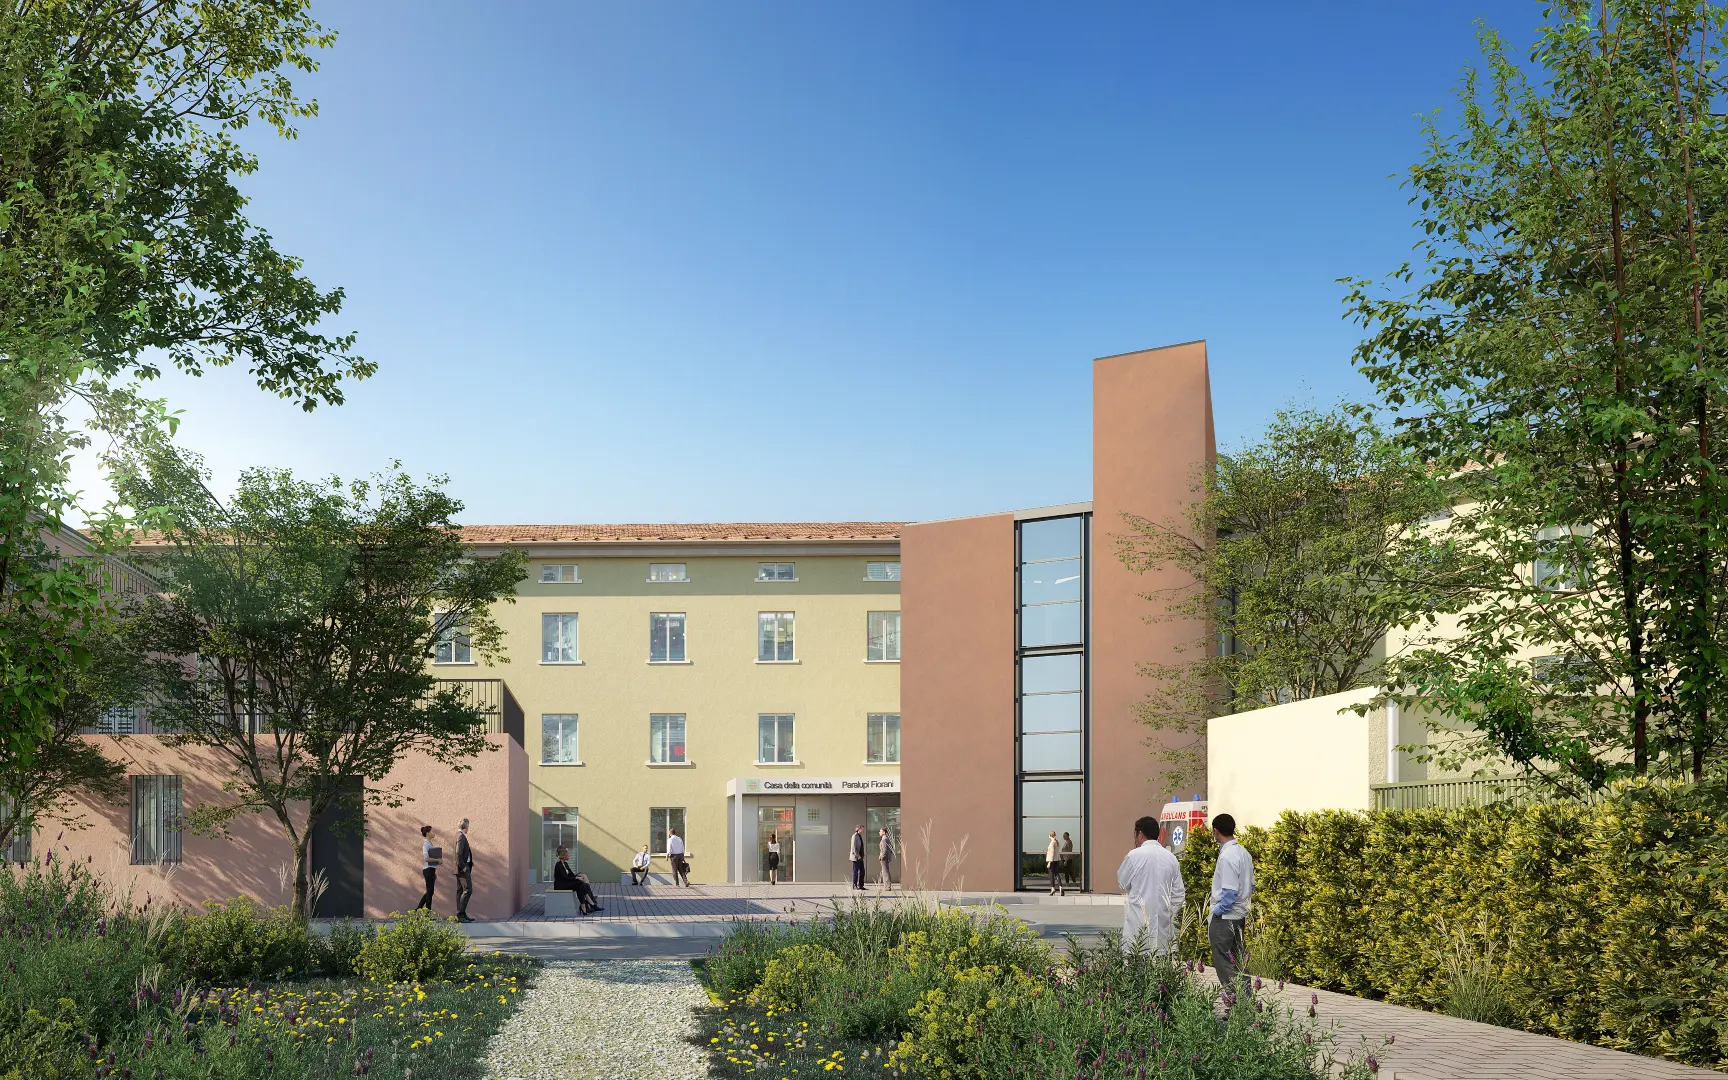 New Community House and Community Hospital in Guastalla